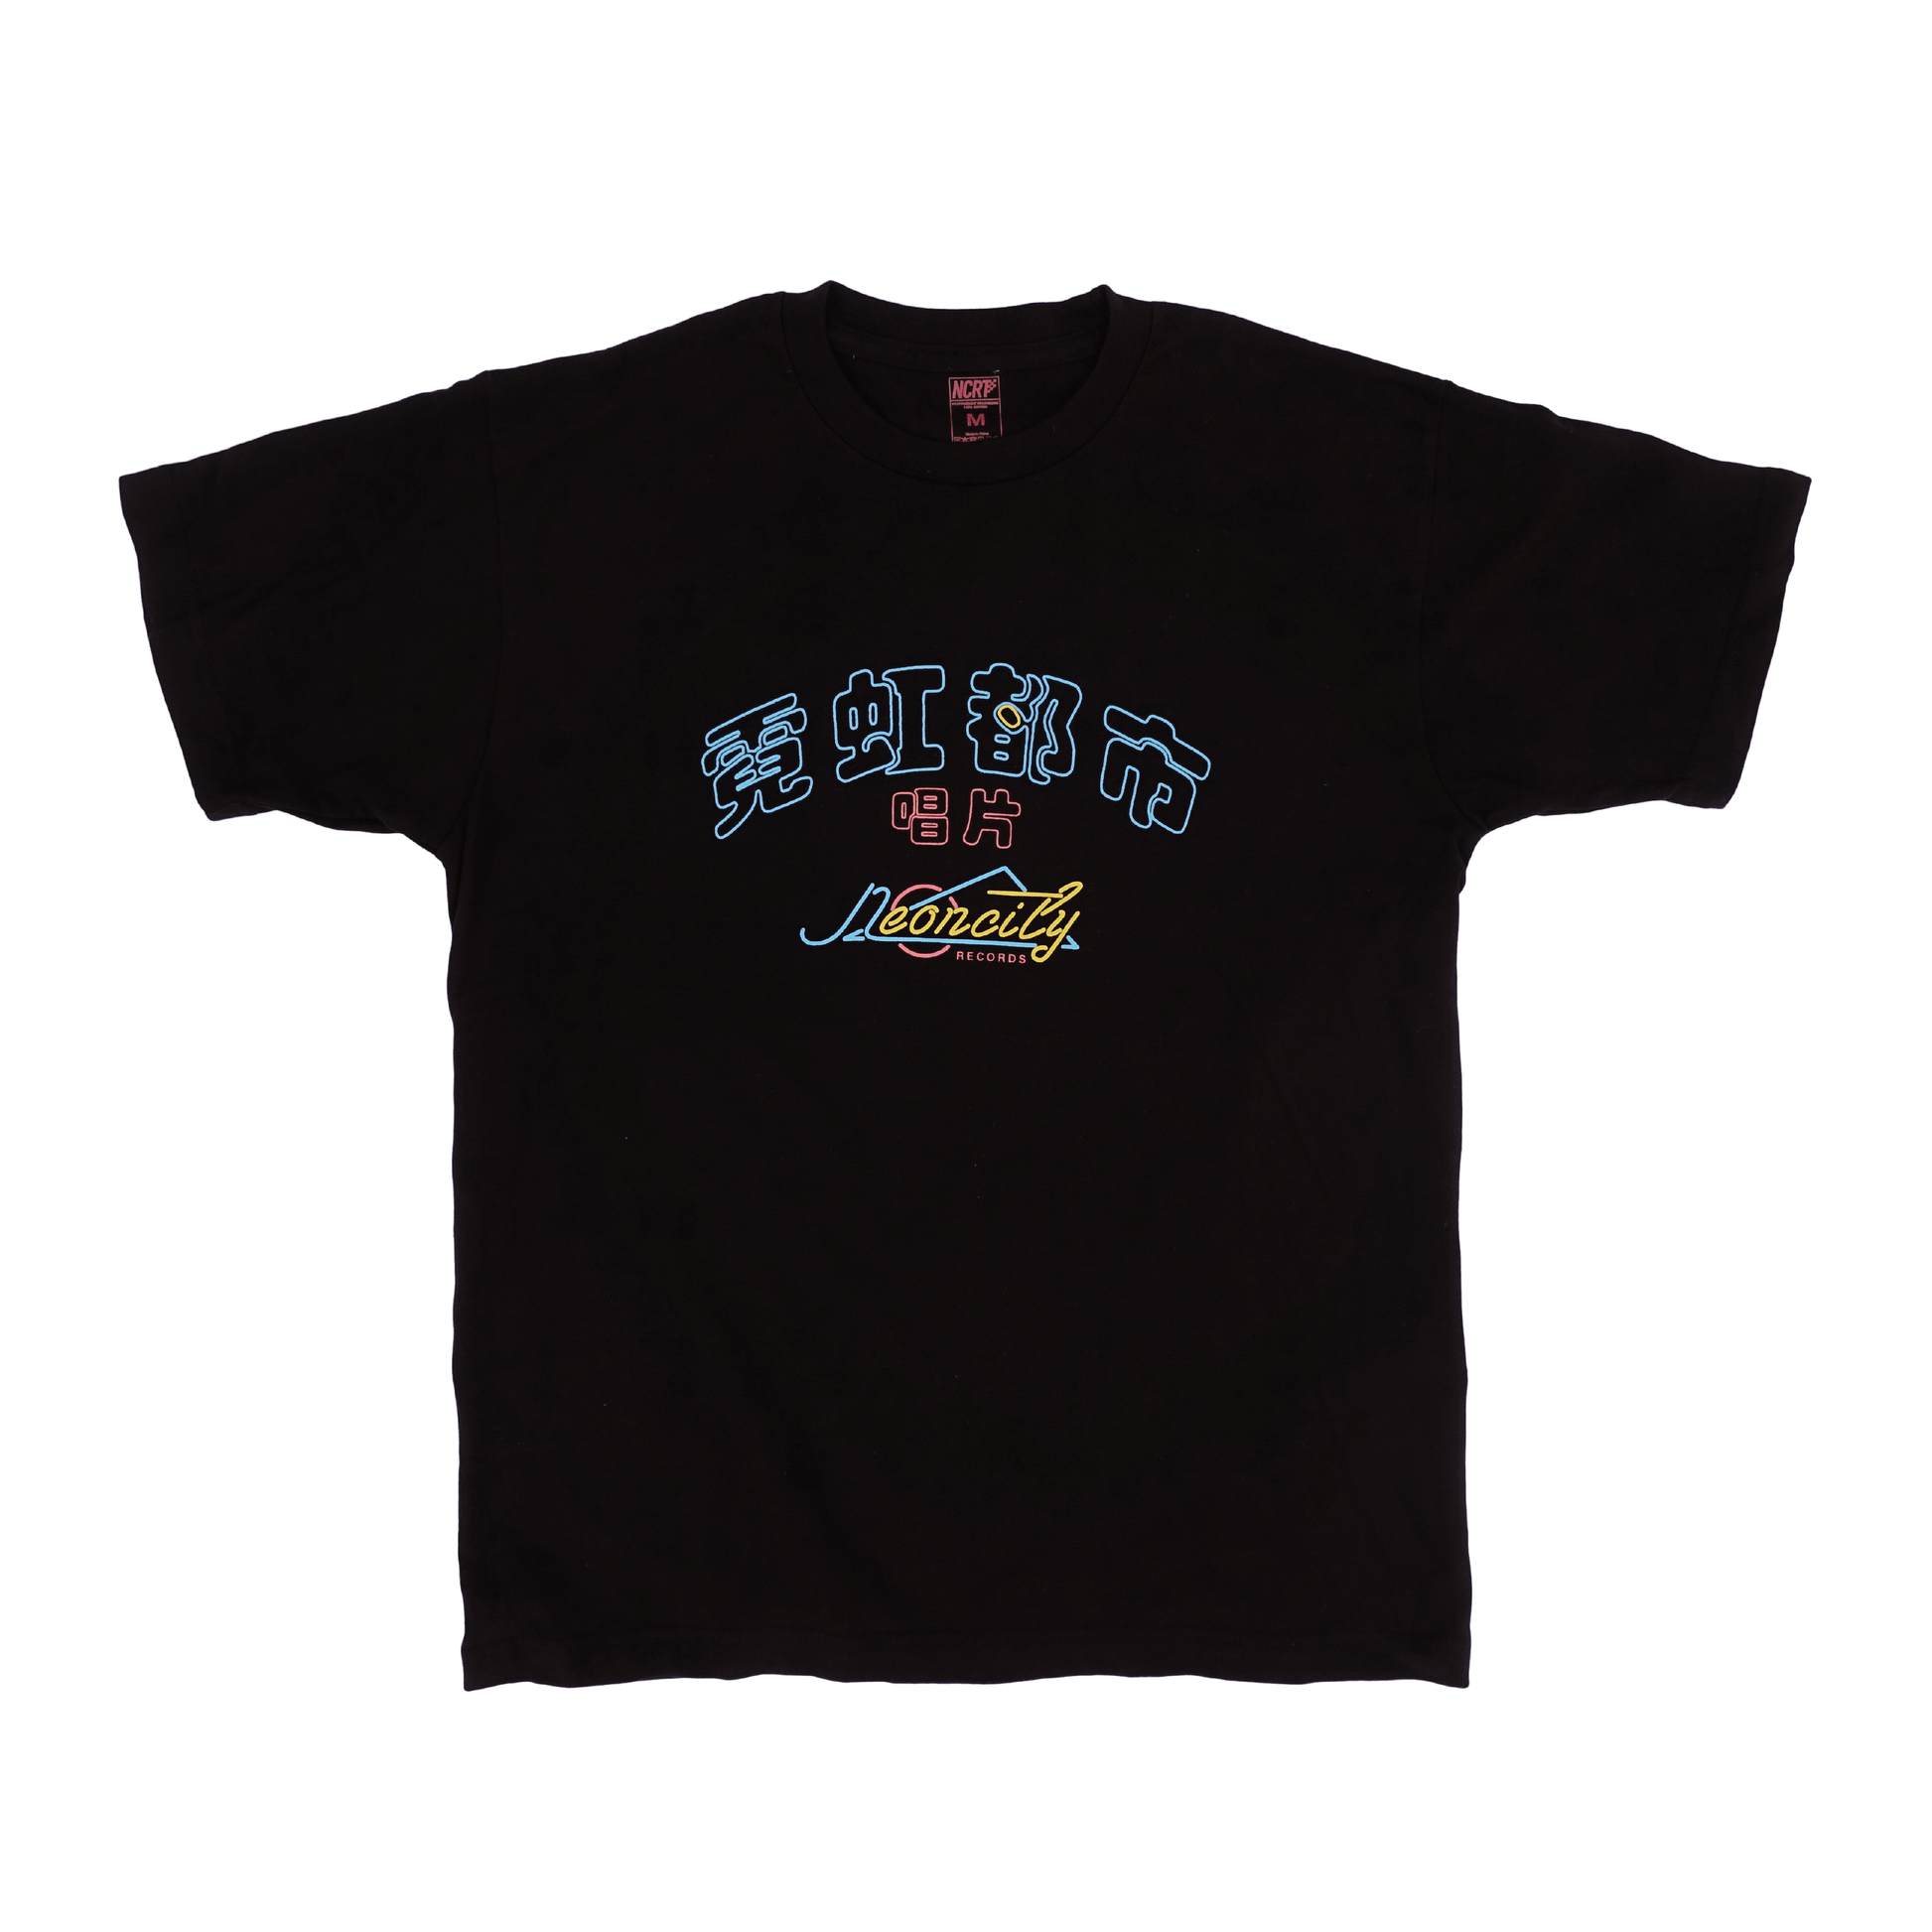 Neoncity Records T-Shirt - NCRT